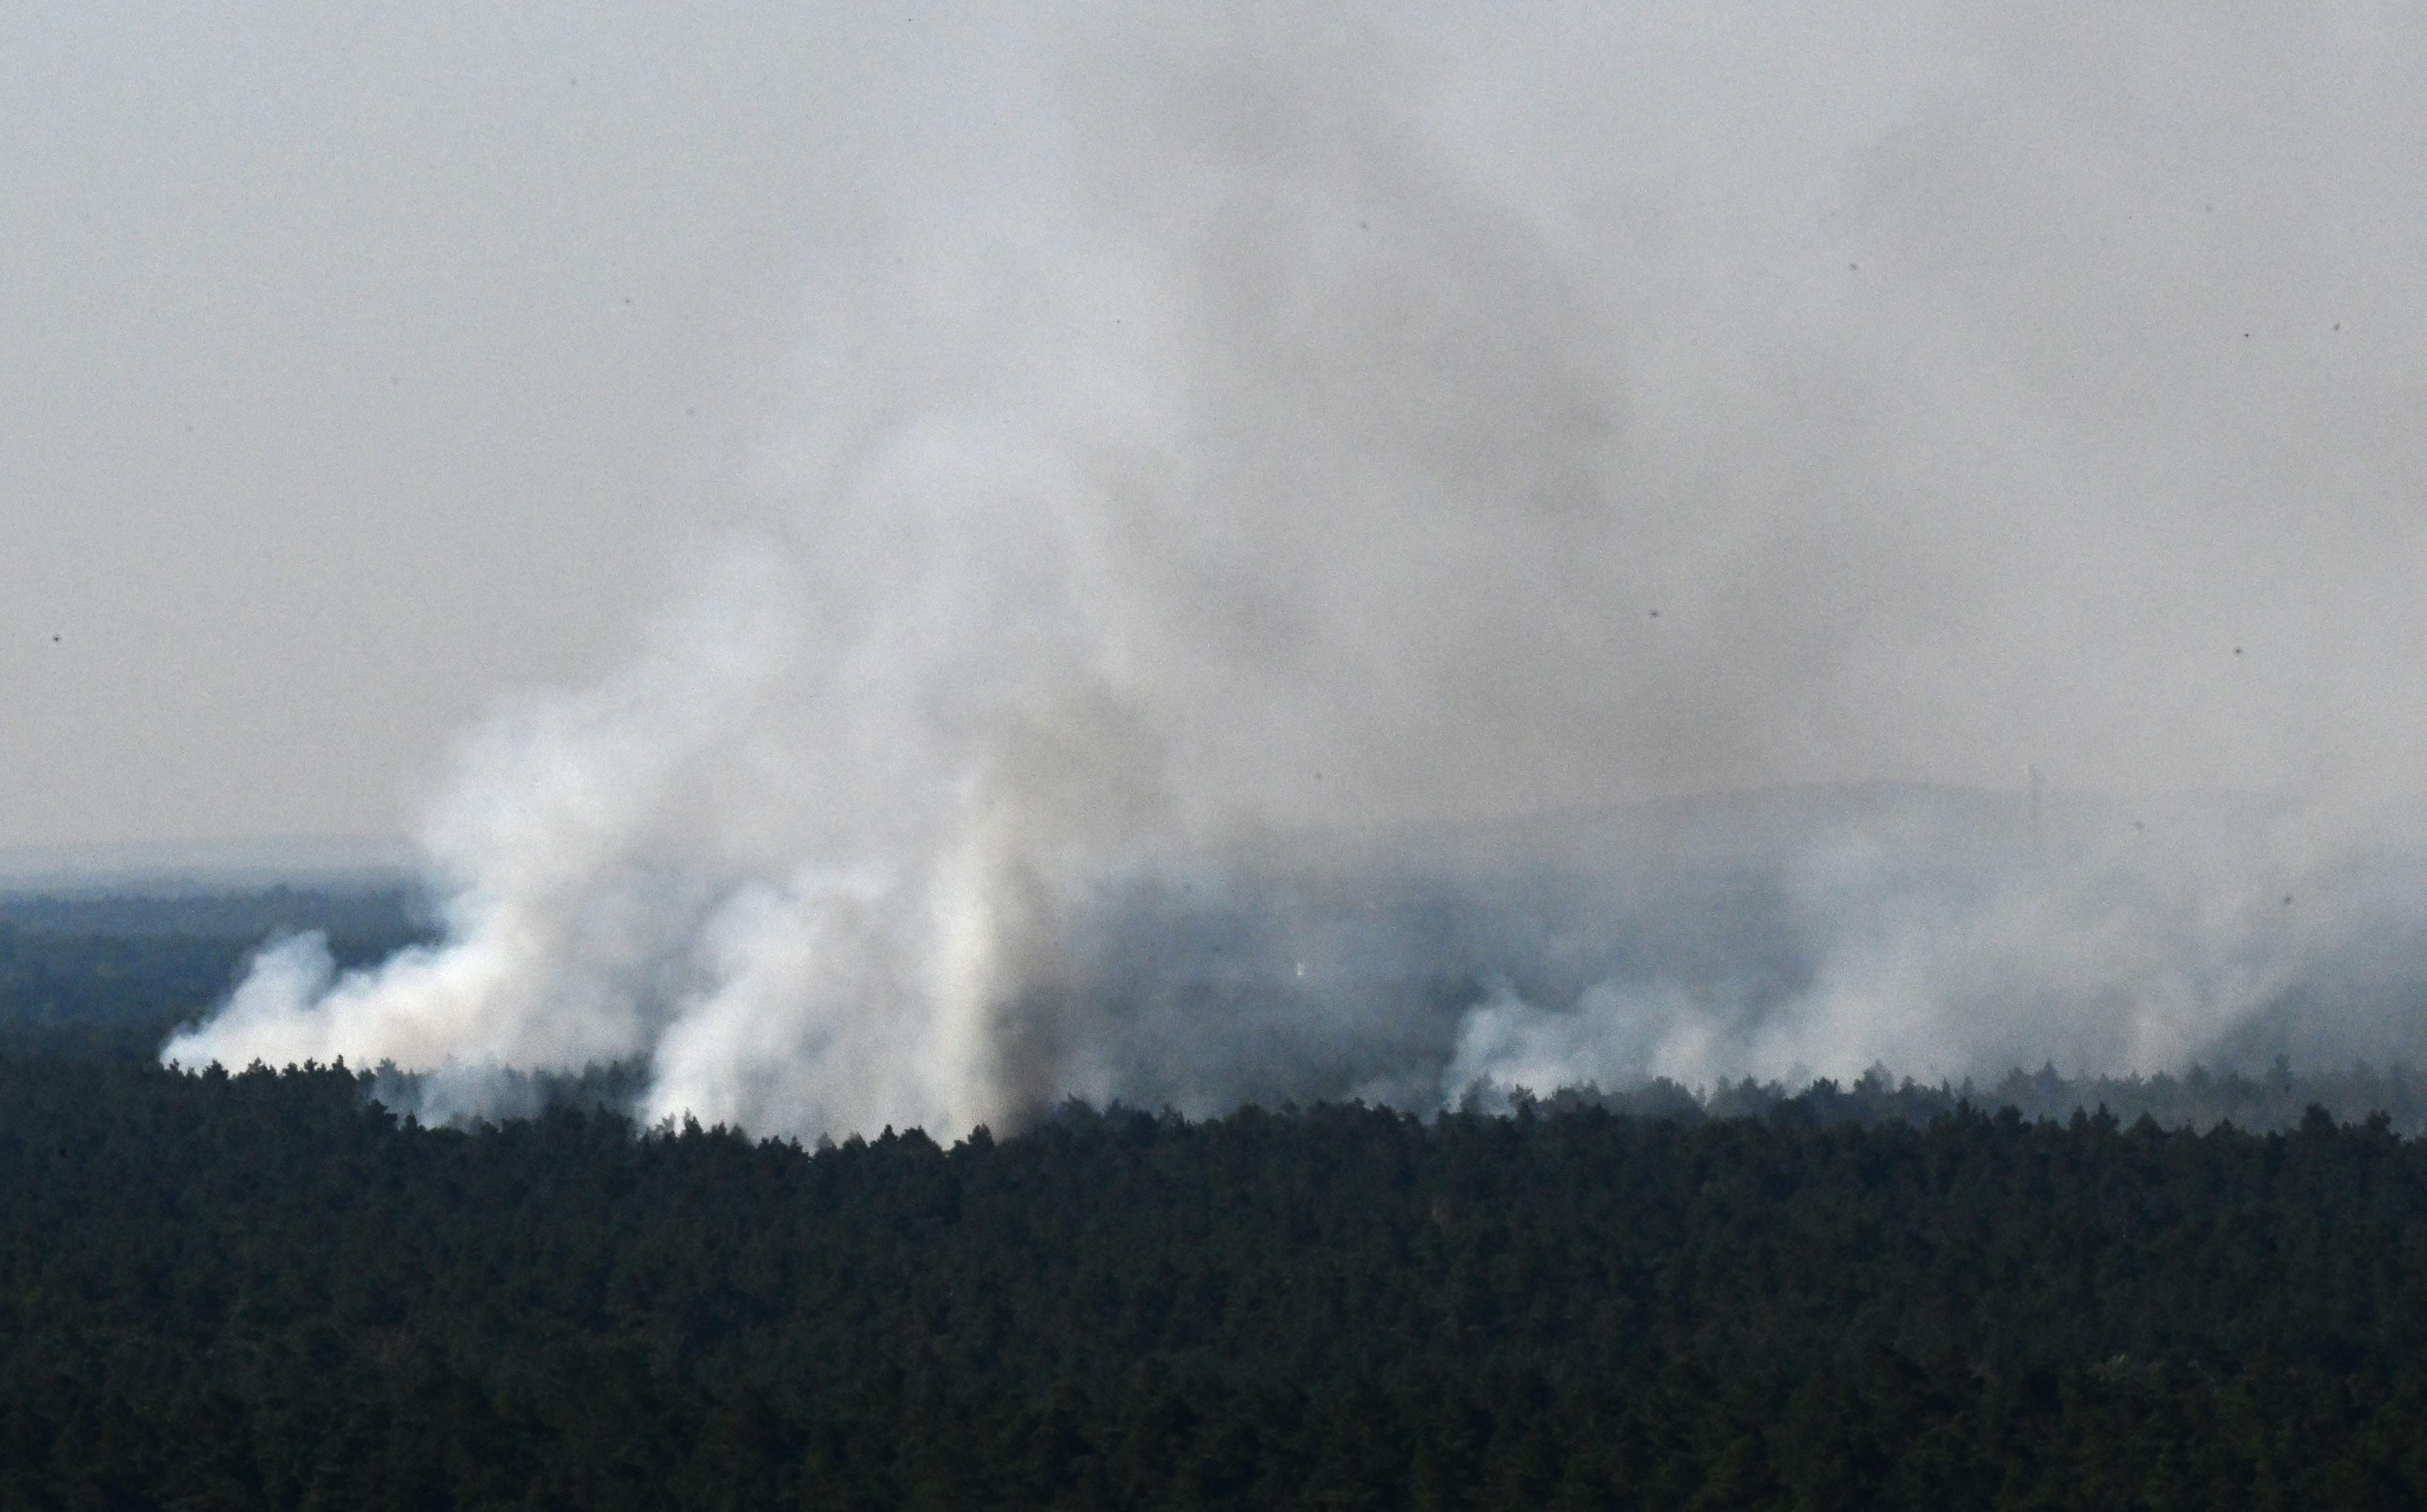 Smoke billows over the Grunewald forest in Berlin on 4 August, 2022